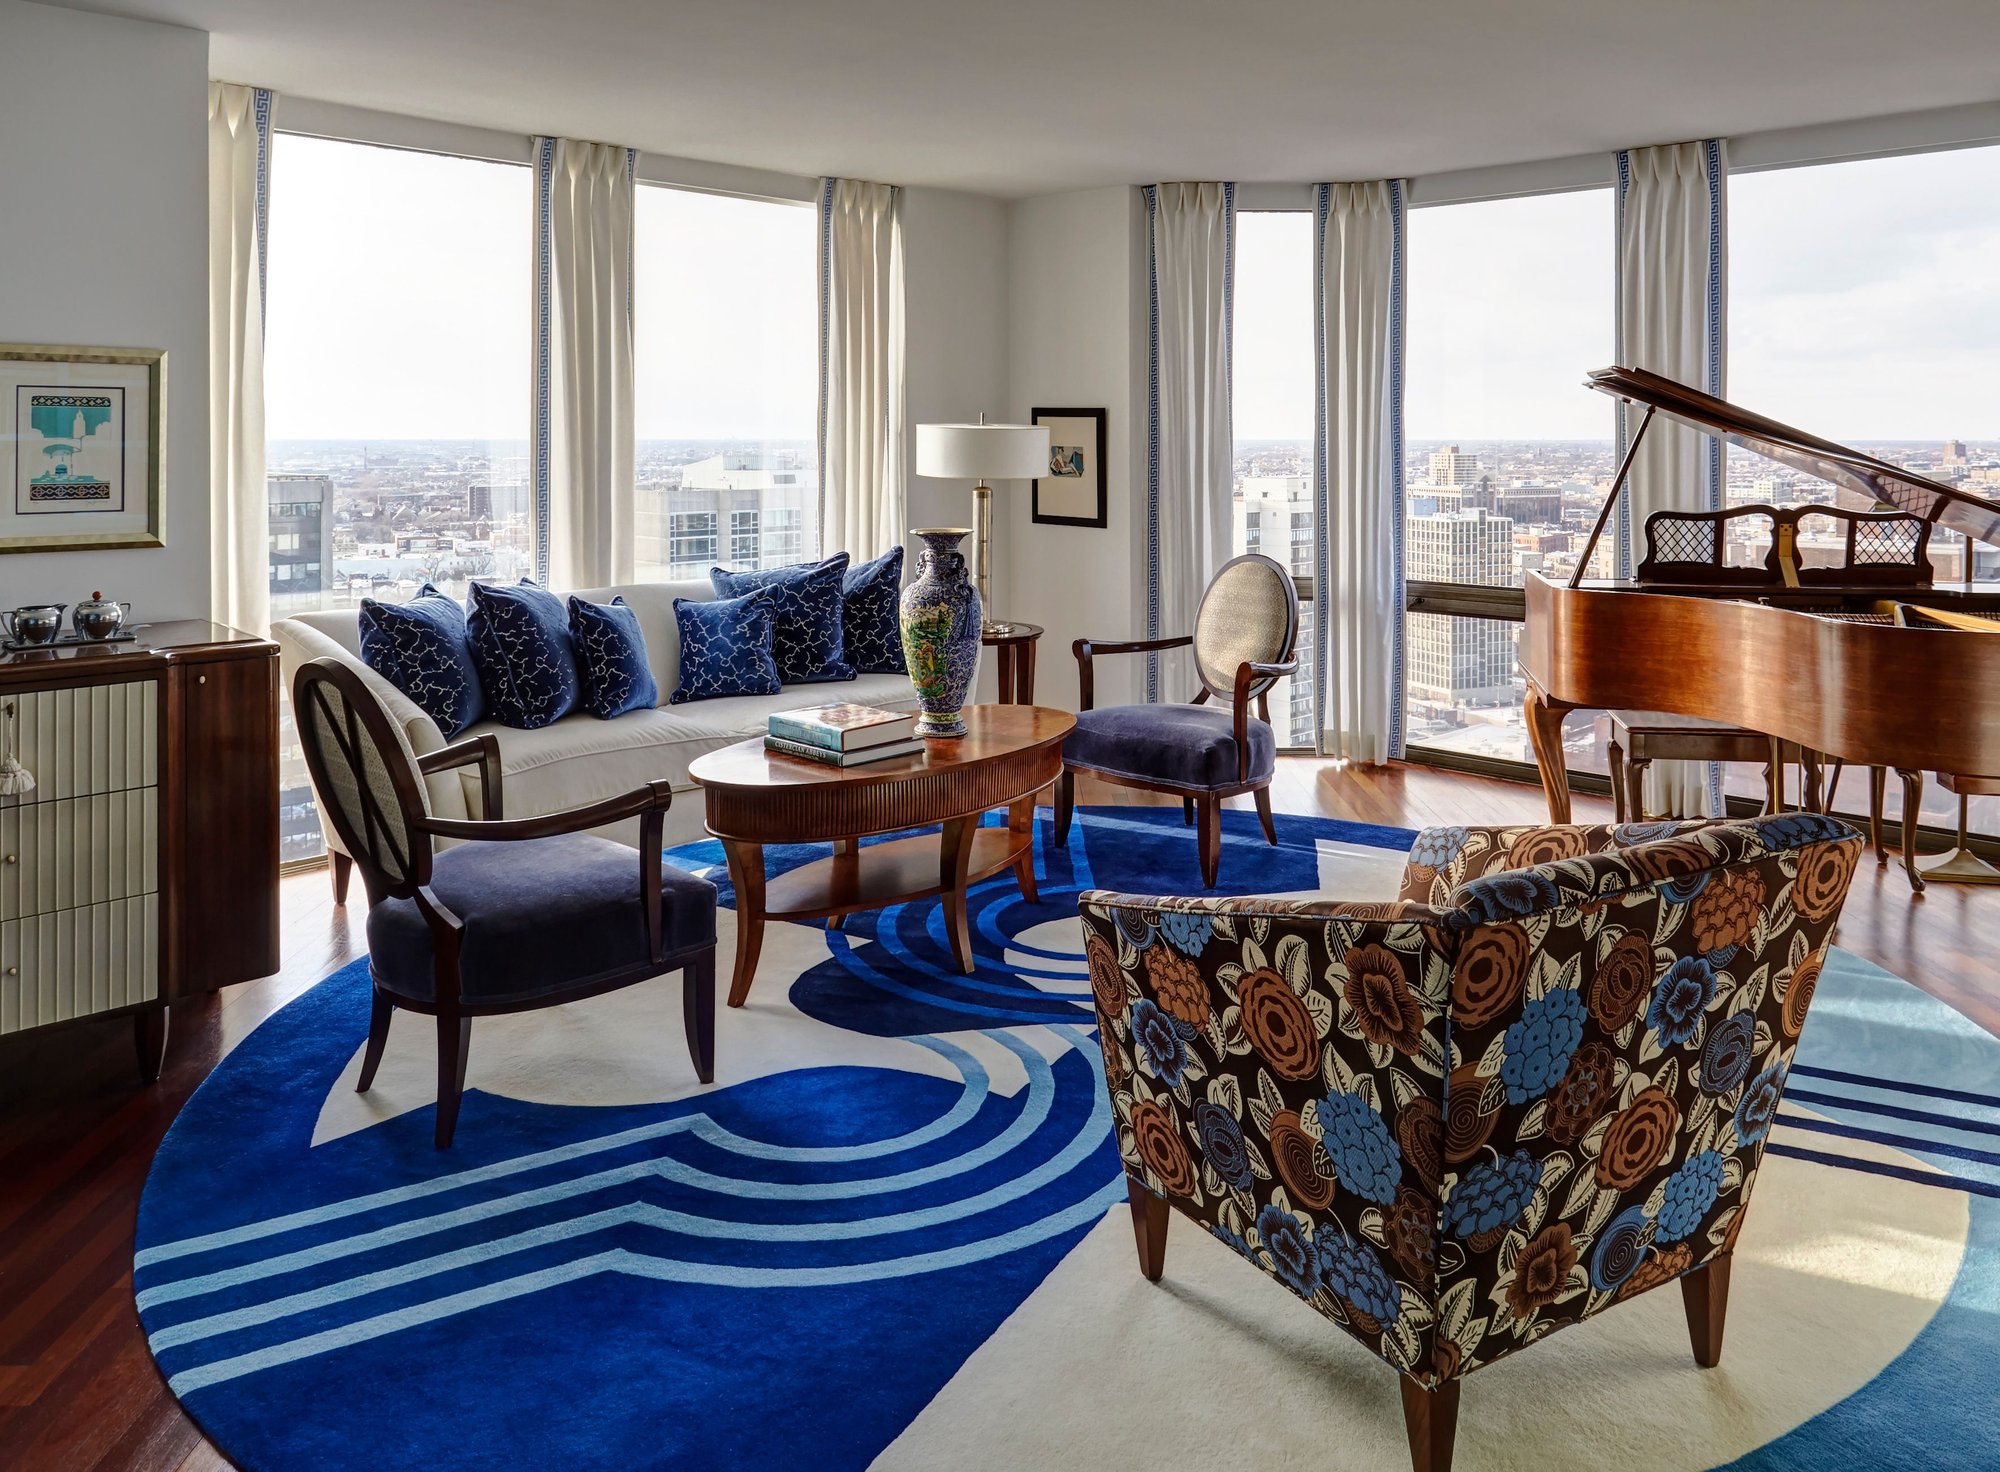 A view of a blue, brown, and white living room with a large bright blue spiral-designed rug surrounded with floor-to-ceiling windows with blue and white drapes - living room design by Jasmin Reese Interiors, Chicago, USA.